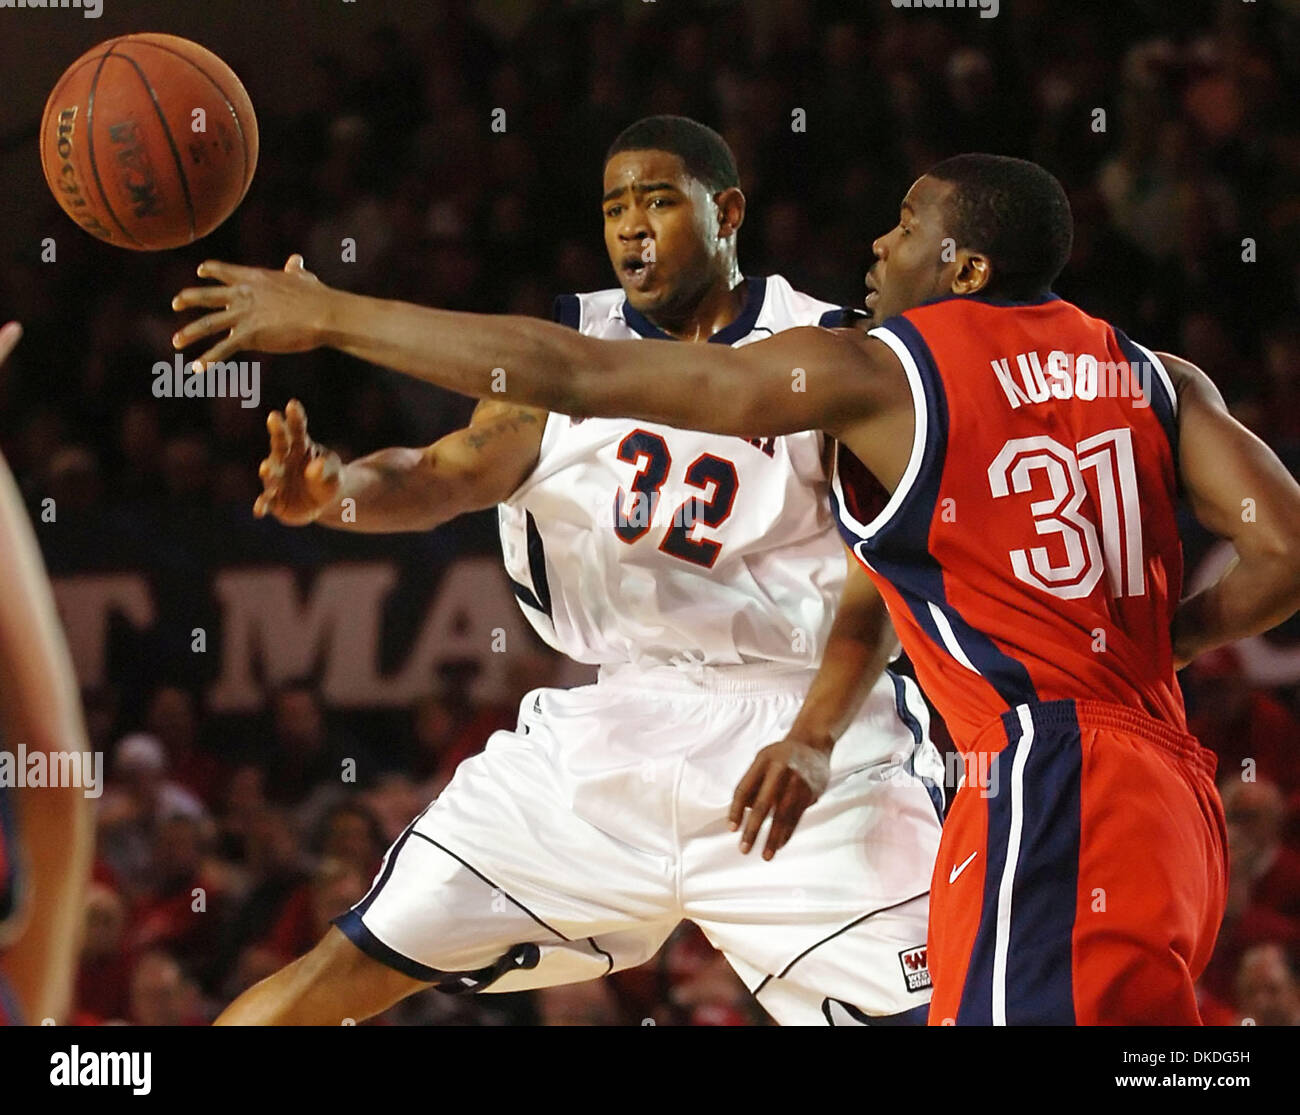 Jan 15, 2007 - Moraga, CA, U.S.A - St. Mary's Gaels JOHN WINSTON, #32, passes the ball against Gonzaga Bulldogs' ABDULLAHI KUSO, #31, in the first half of their game on Monday, January 15, 2007 at McKeon Pavilion in Moraga, Calif. Stock Photo